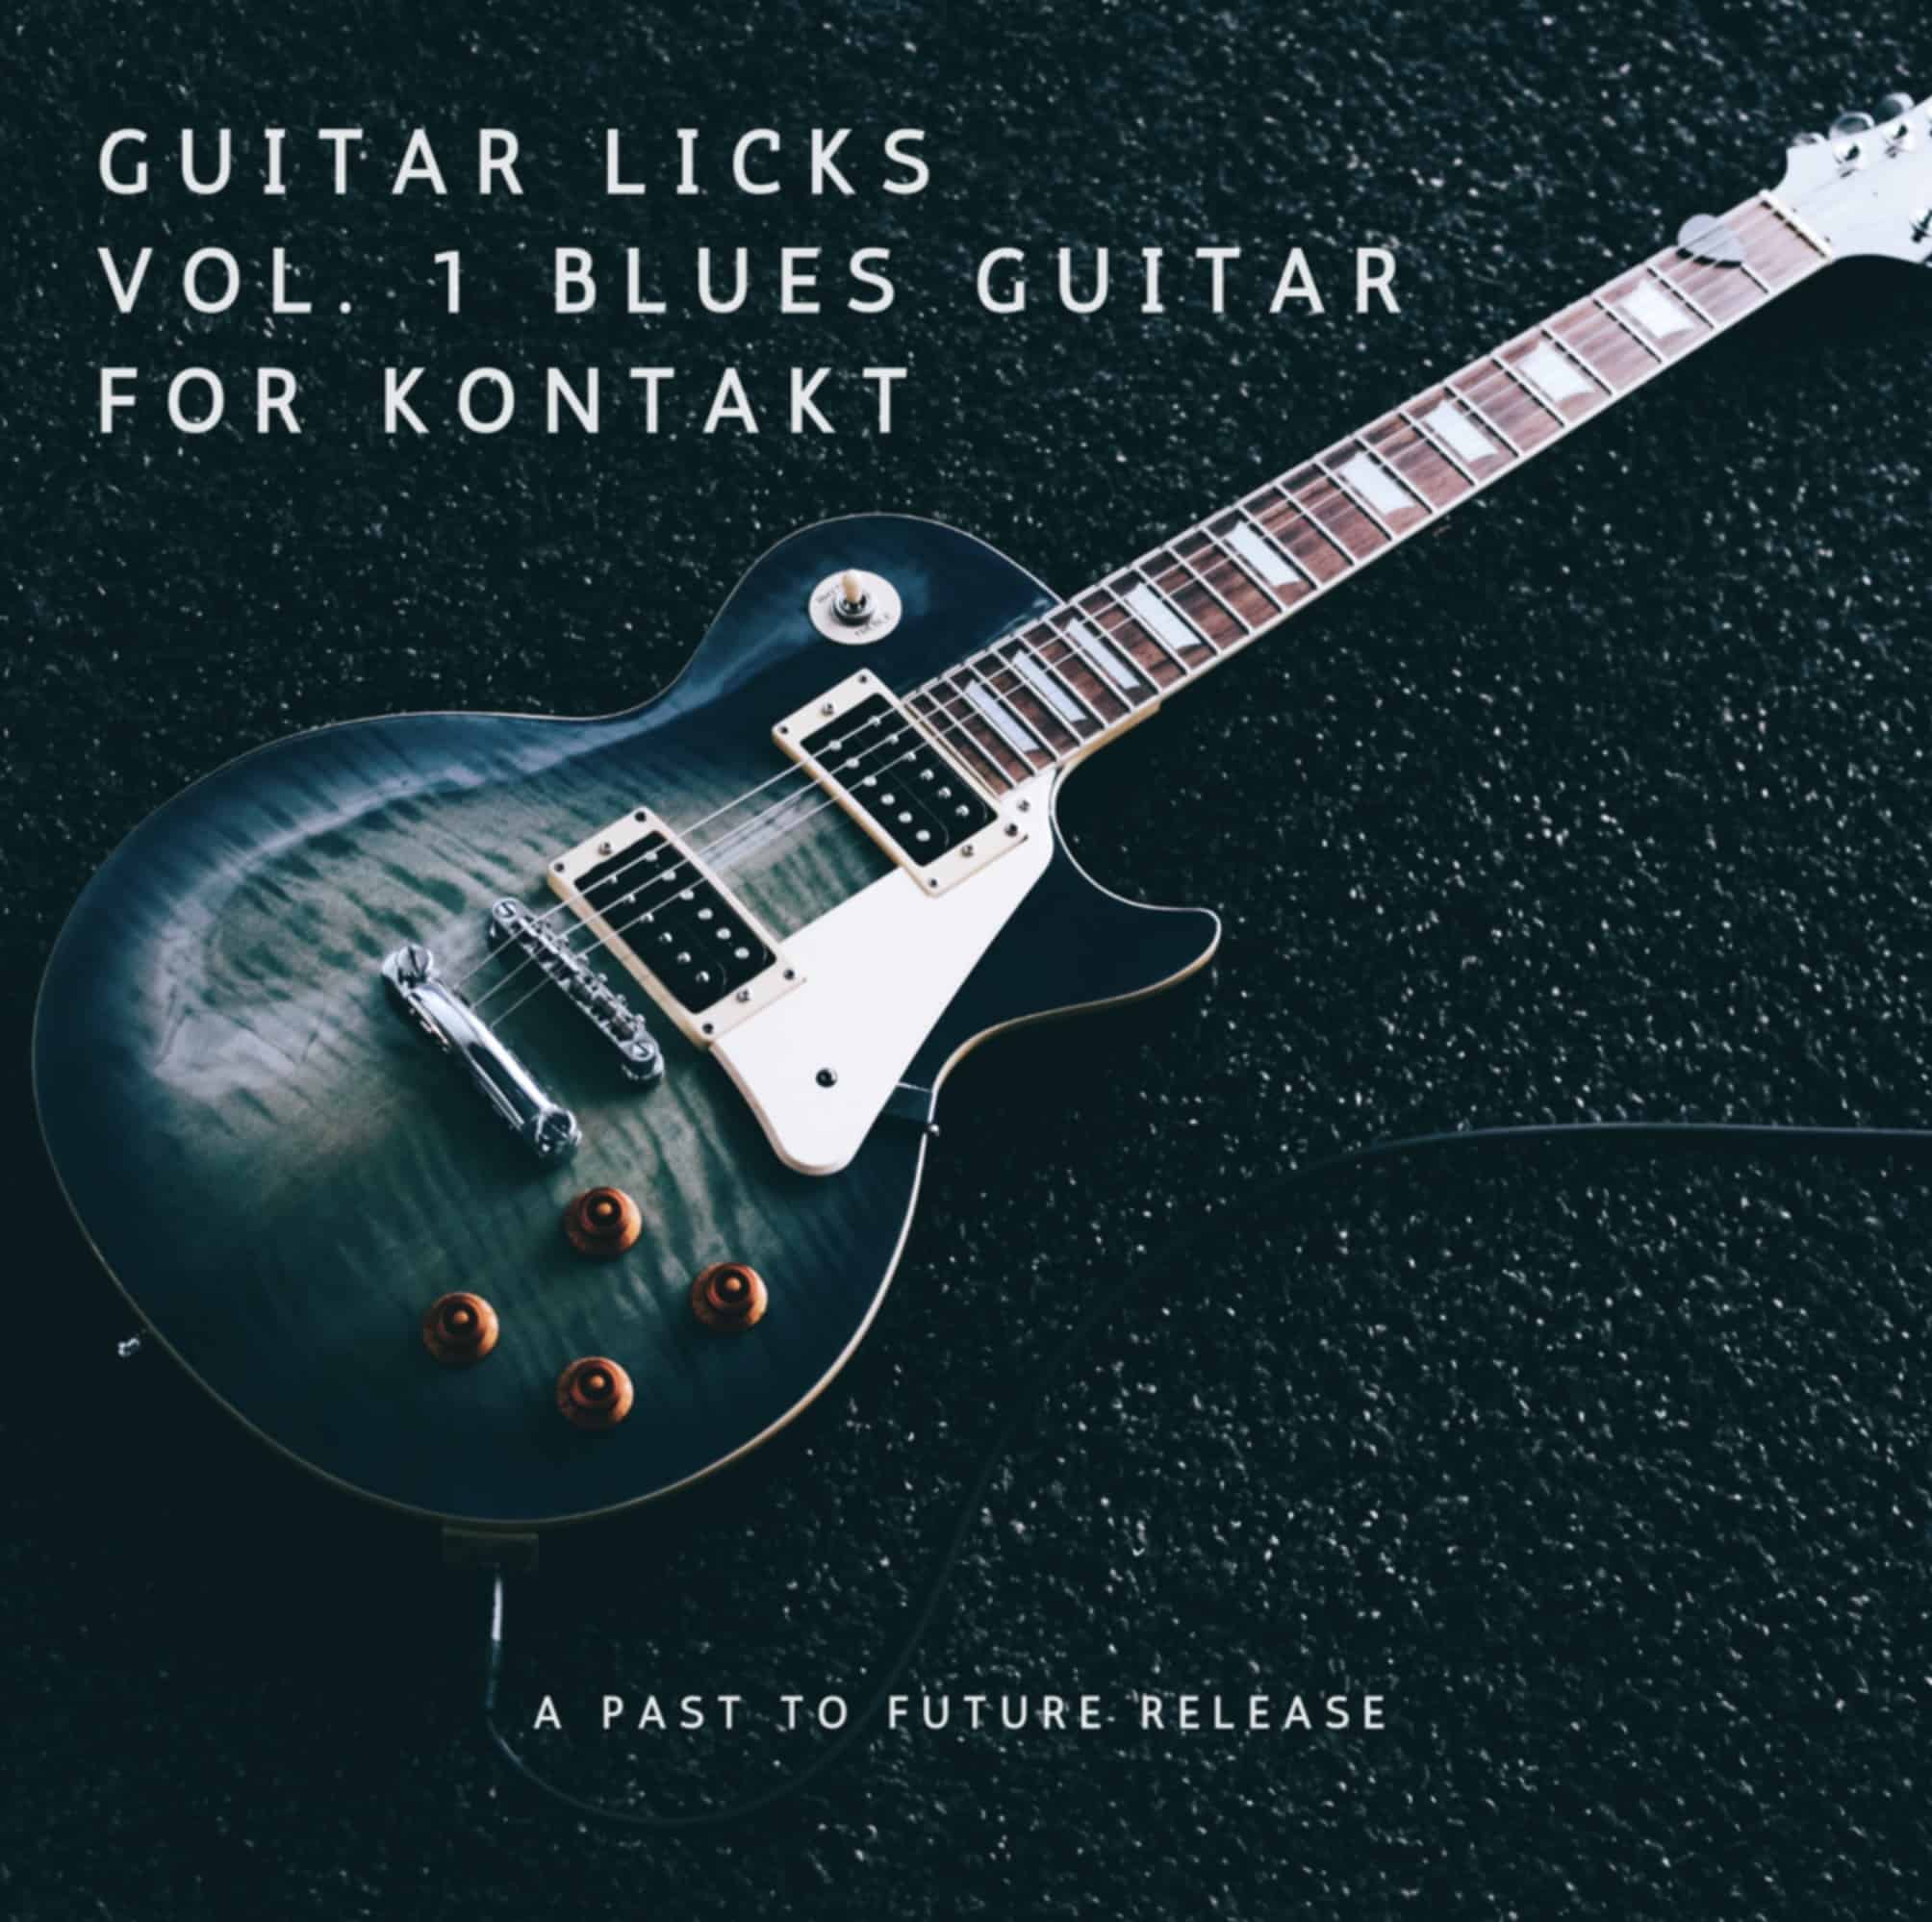 Past To Future Reverbs New Guitar Licks Vol. 1 Blues Guitar For Kontakt 1 Introductory Price